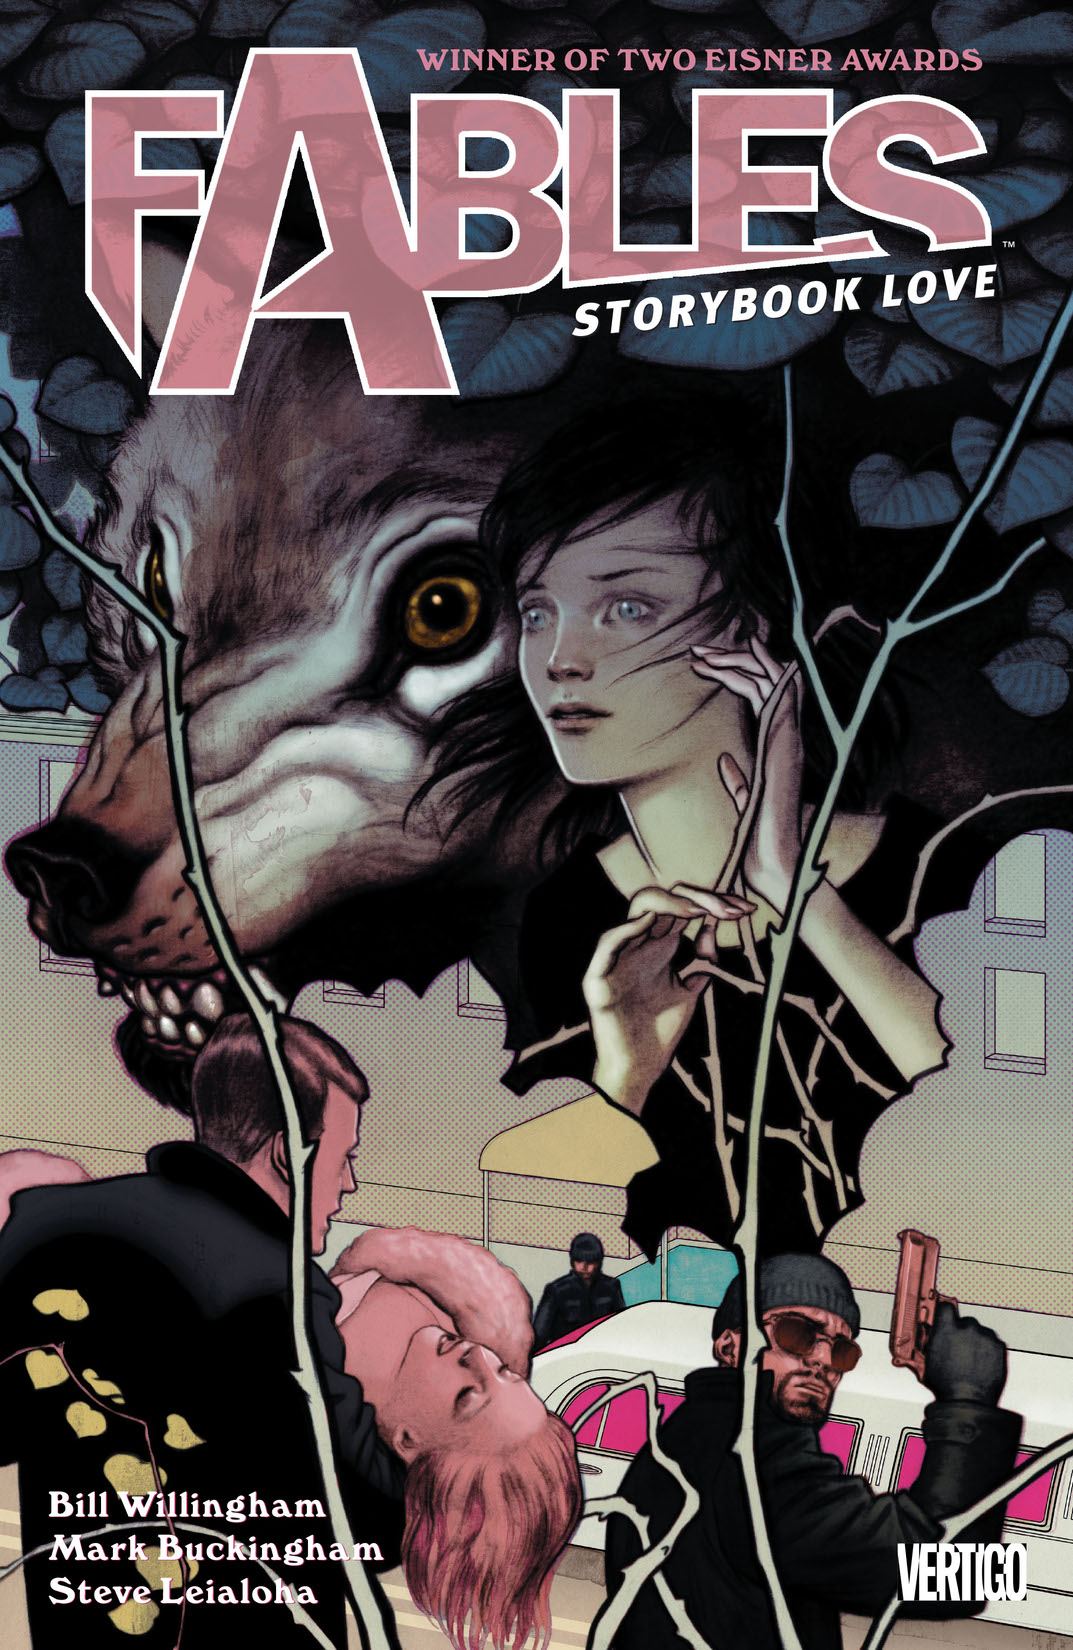 Fables Vol. 3: Storybook Love preview images